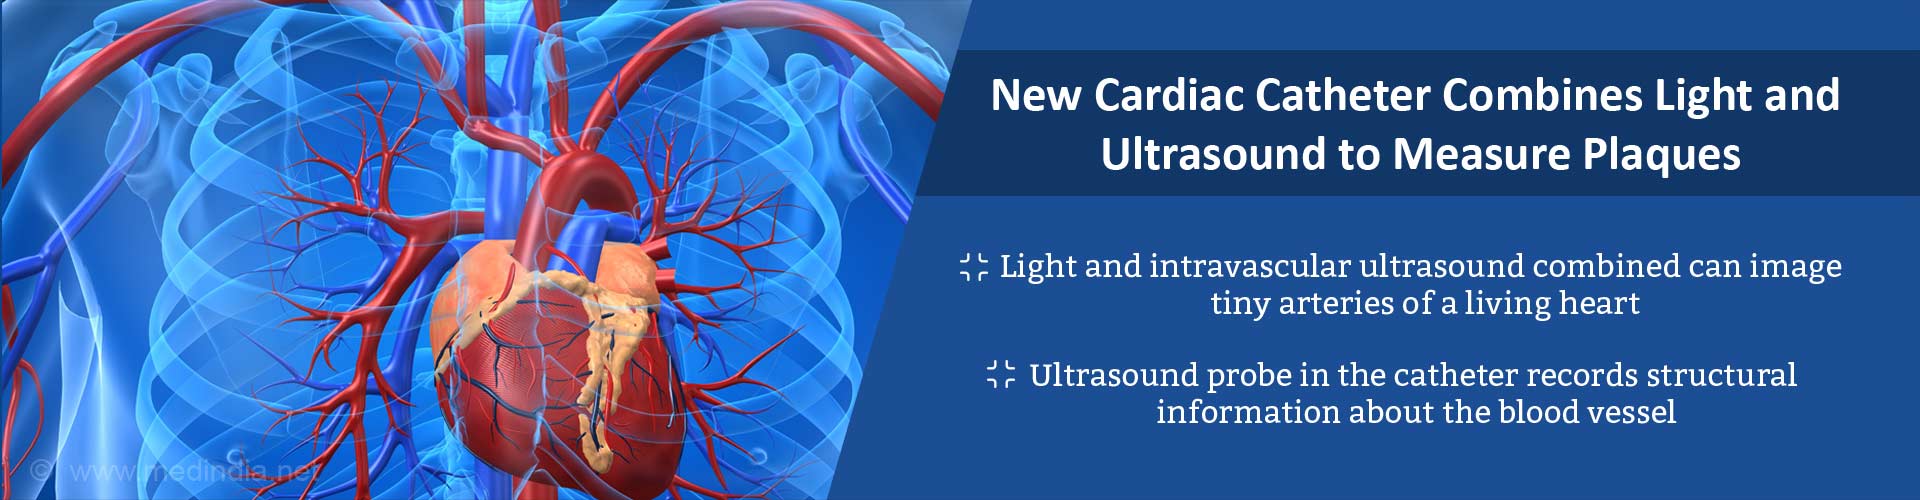 New cardiac catheter combines light and ultrasound measure plaques
- Light and intravascular ultrasound combined can image tiny arteries of a living heart
- Ultrasound probe in the catheter records structural information about the blood vessel